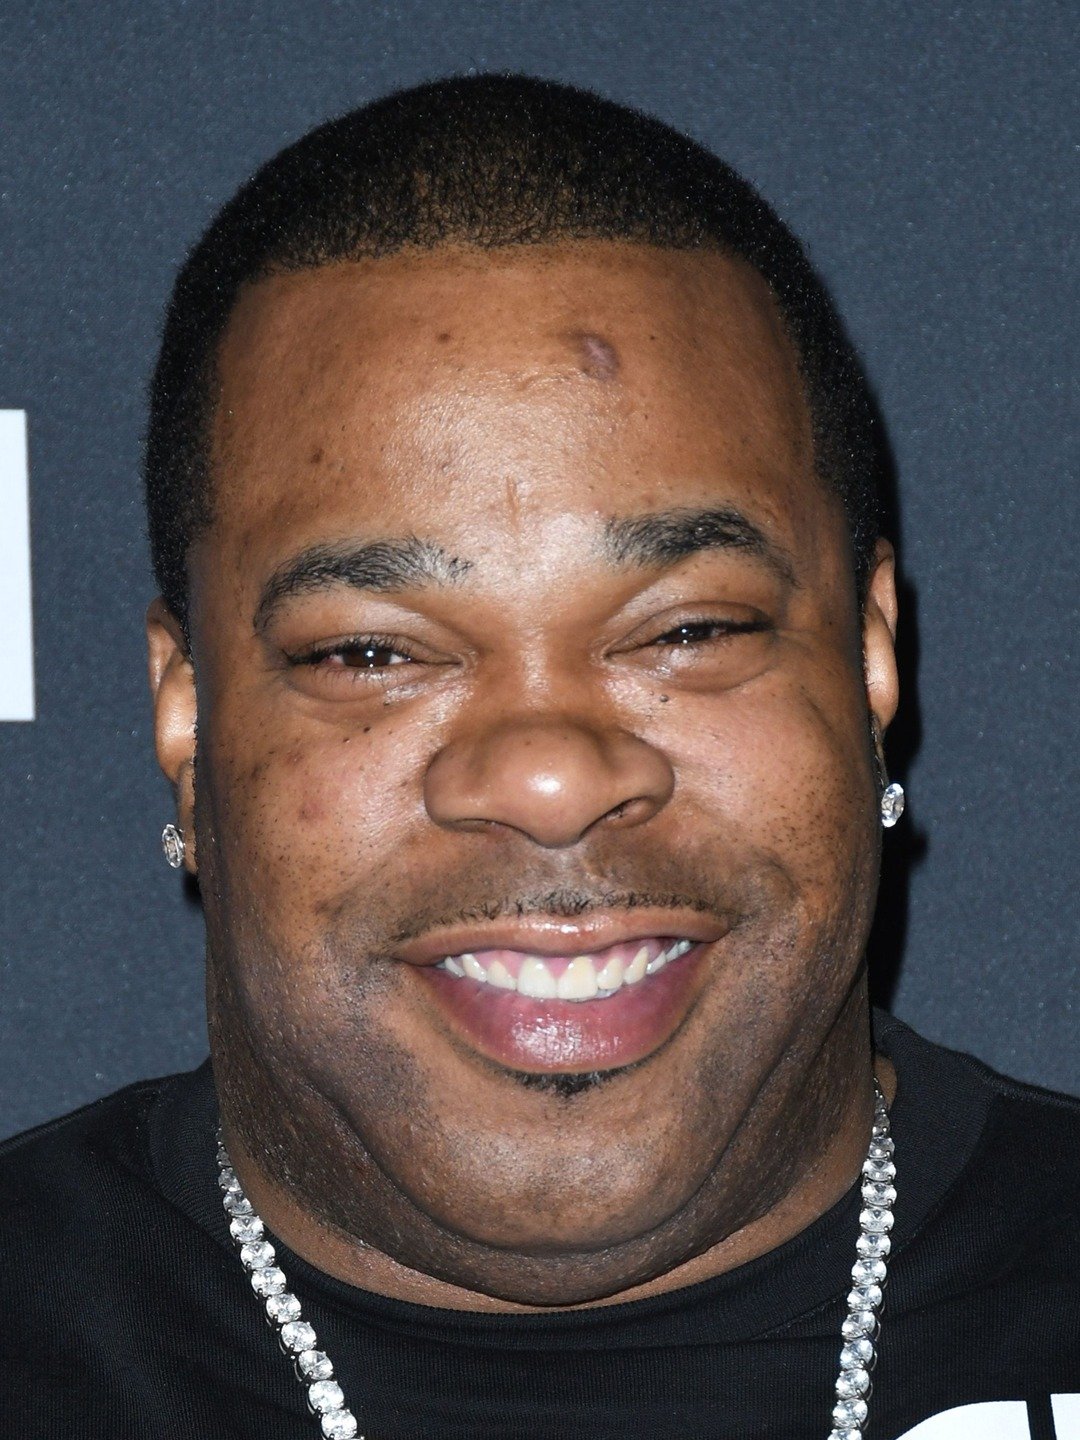 How tall is Busta Rhymes?